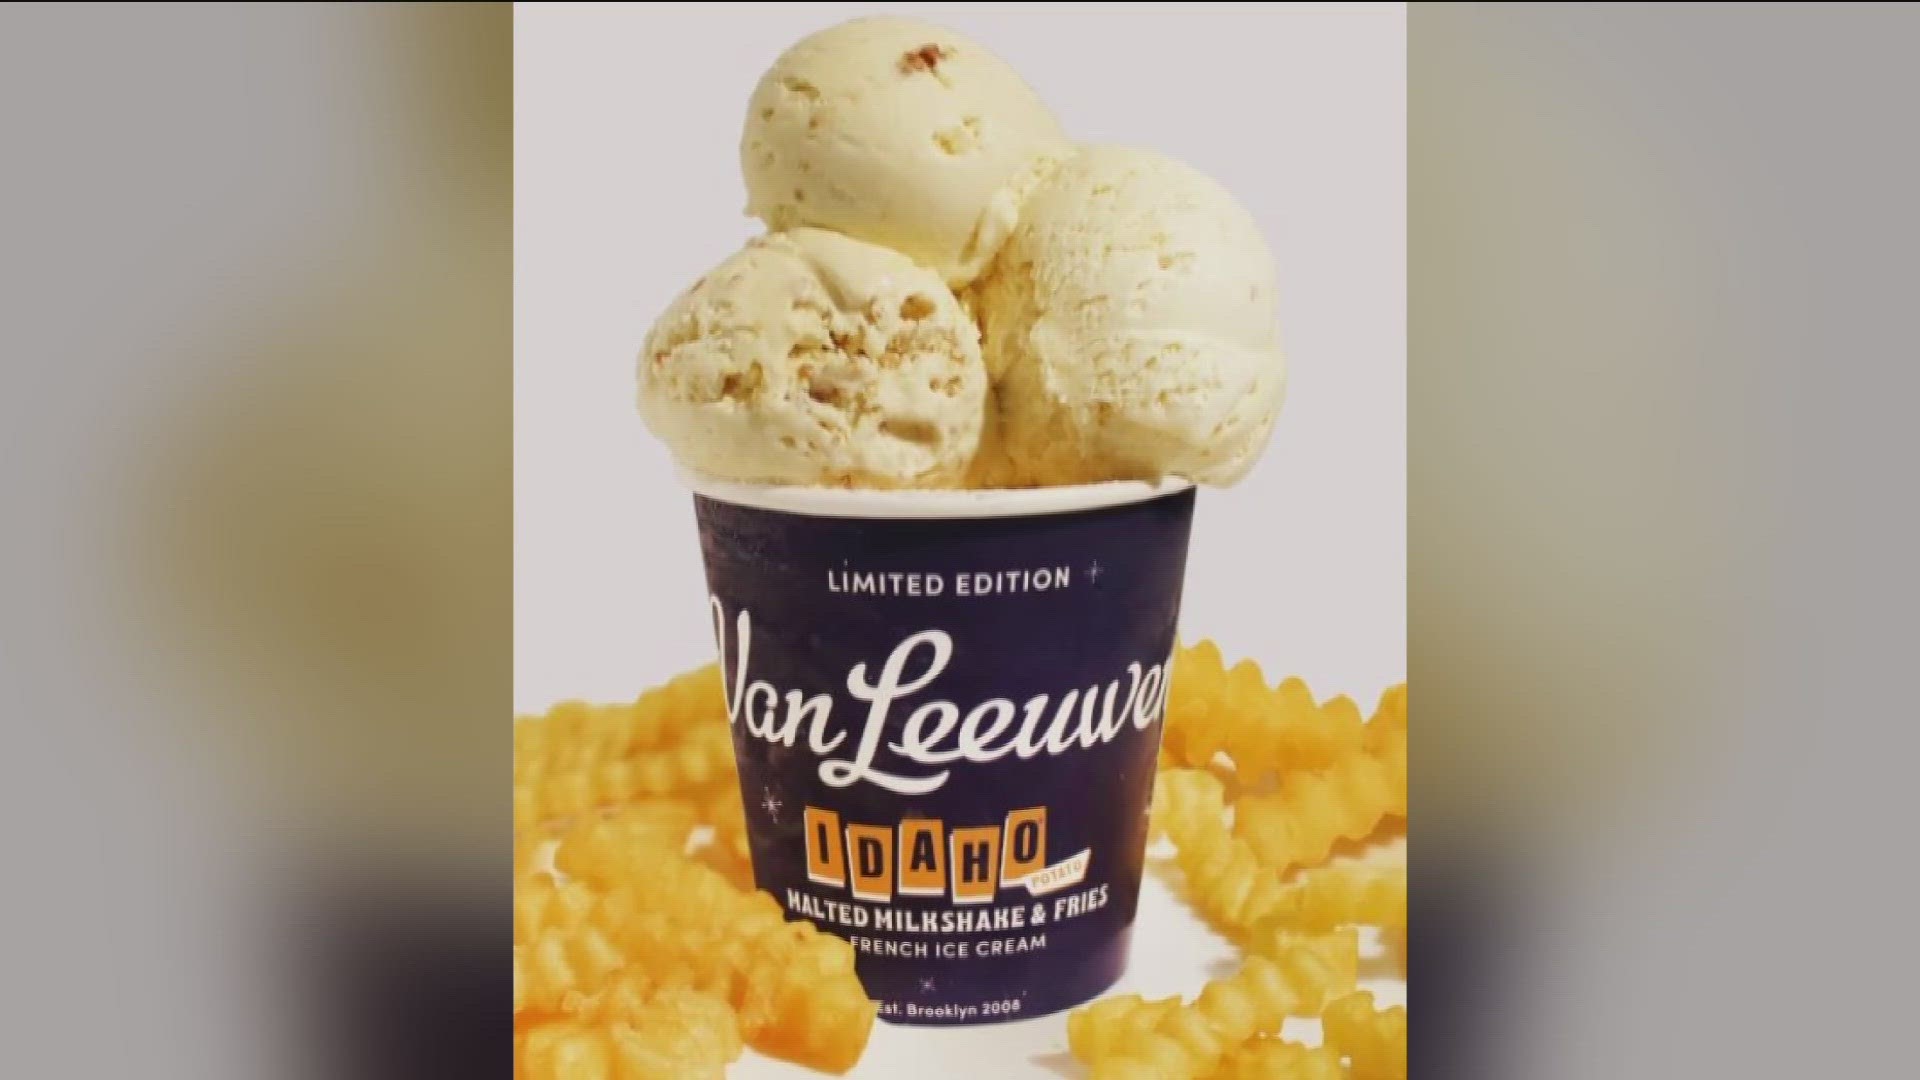 The new flavor made by Van Leeuwen will be sold in 3,500 Walmart's across the country beginning Sept. 1.